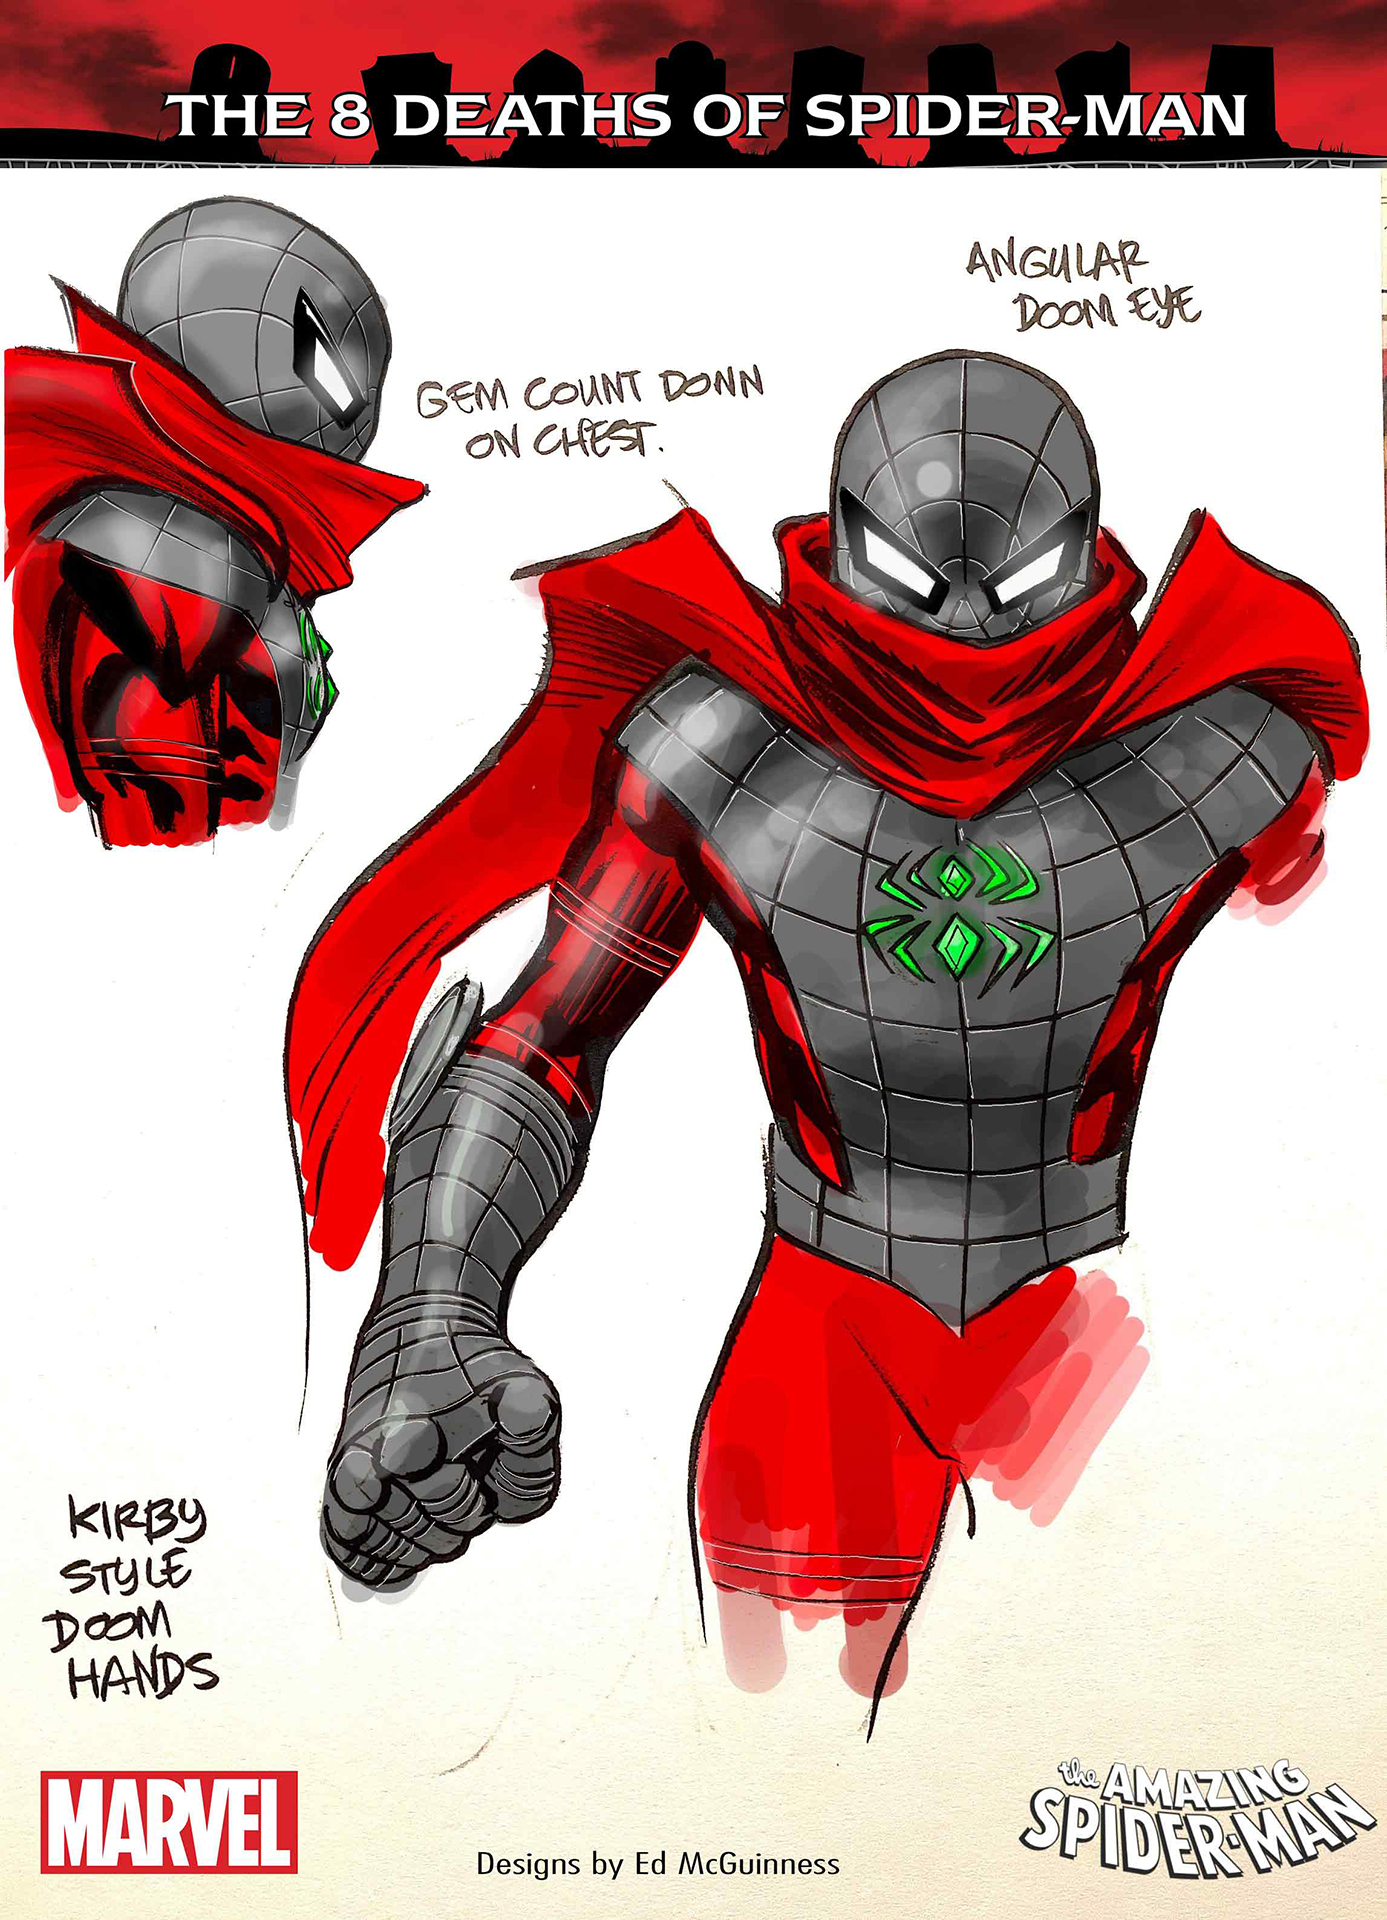 Spider-Man magical suit design by Ed McGuiness